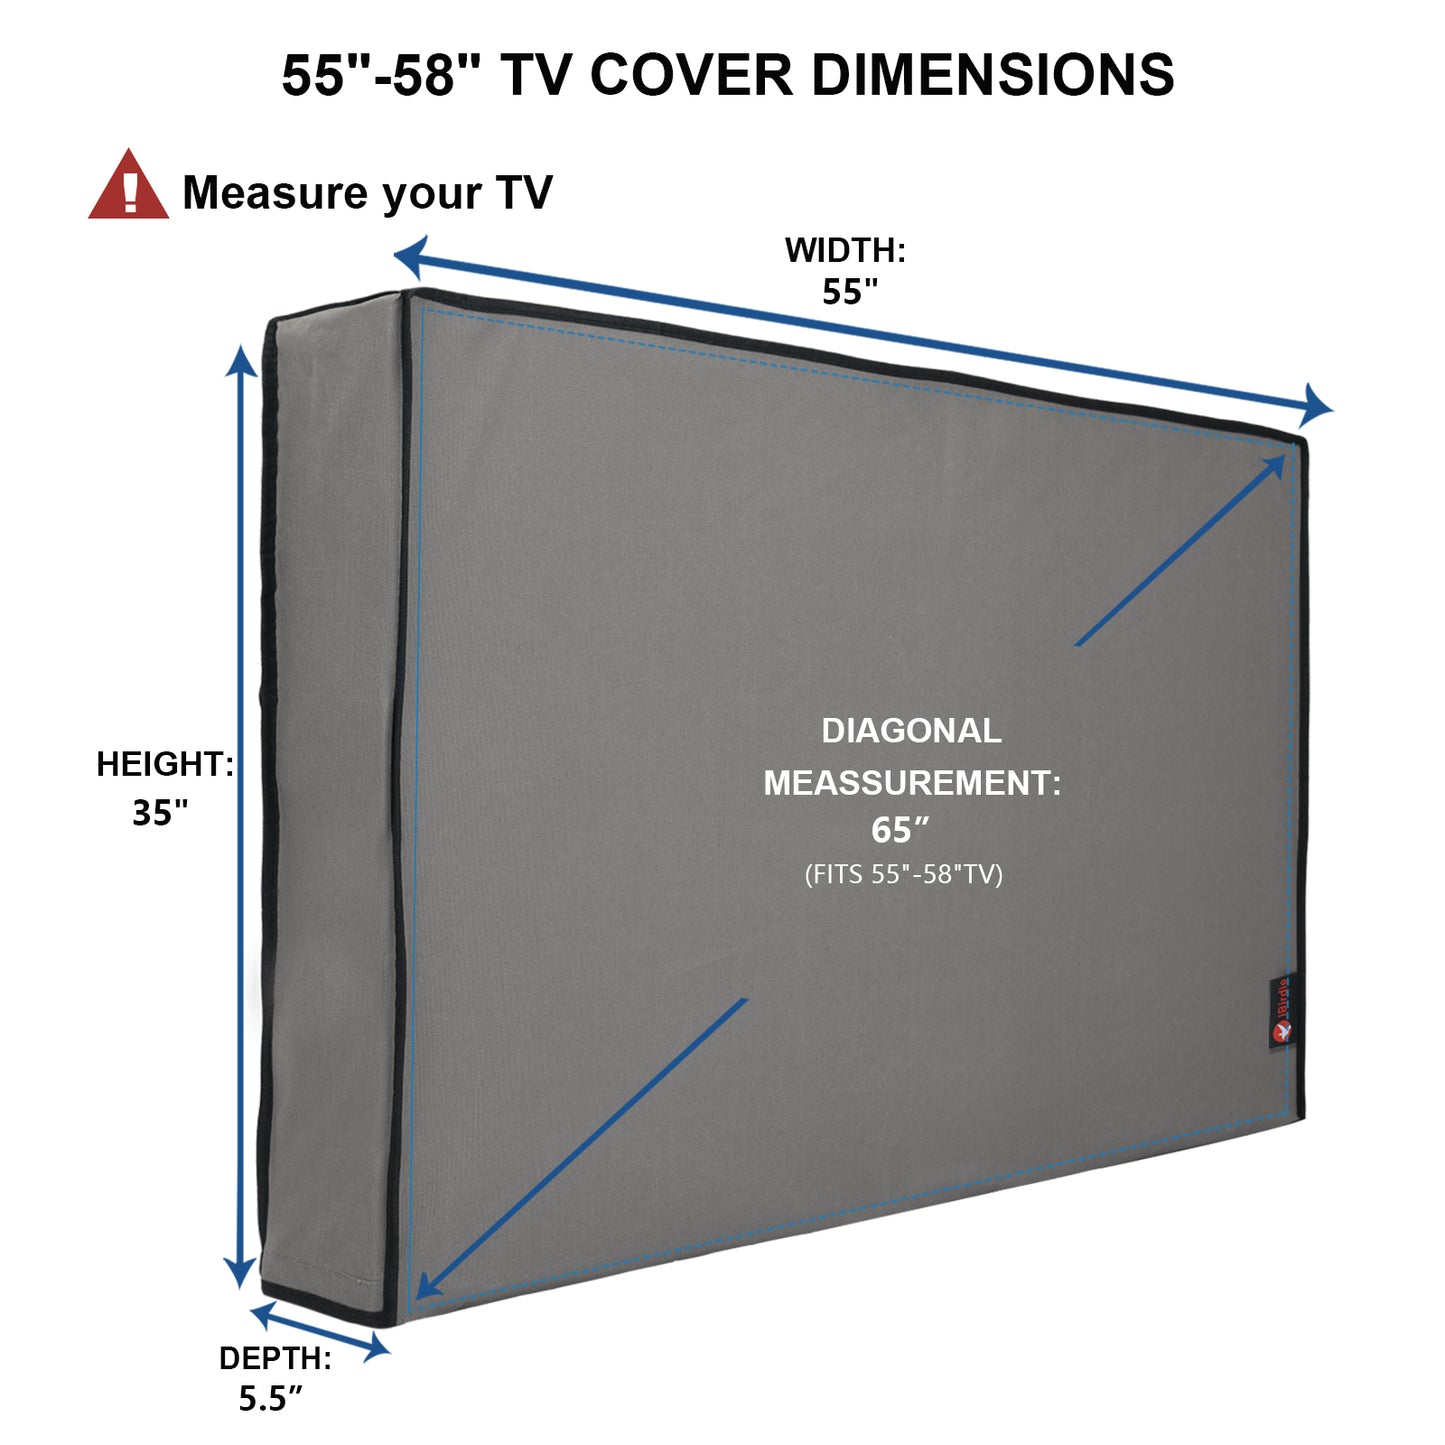 Outdoor Waterproof and Weatherproof TV Cover for Outside Flat Screen TV - Cover